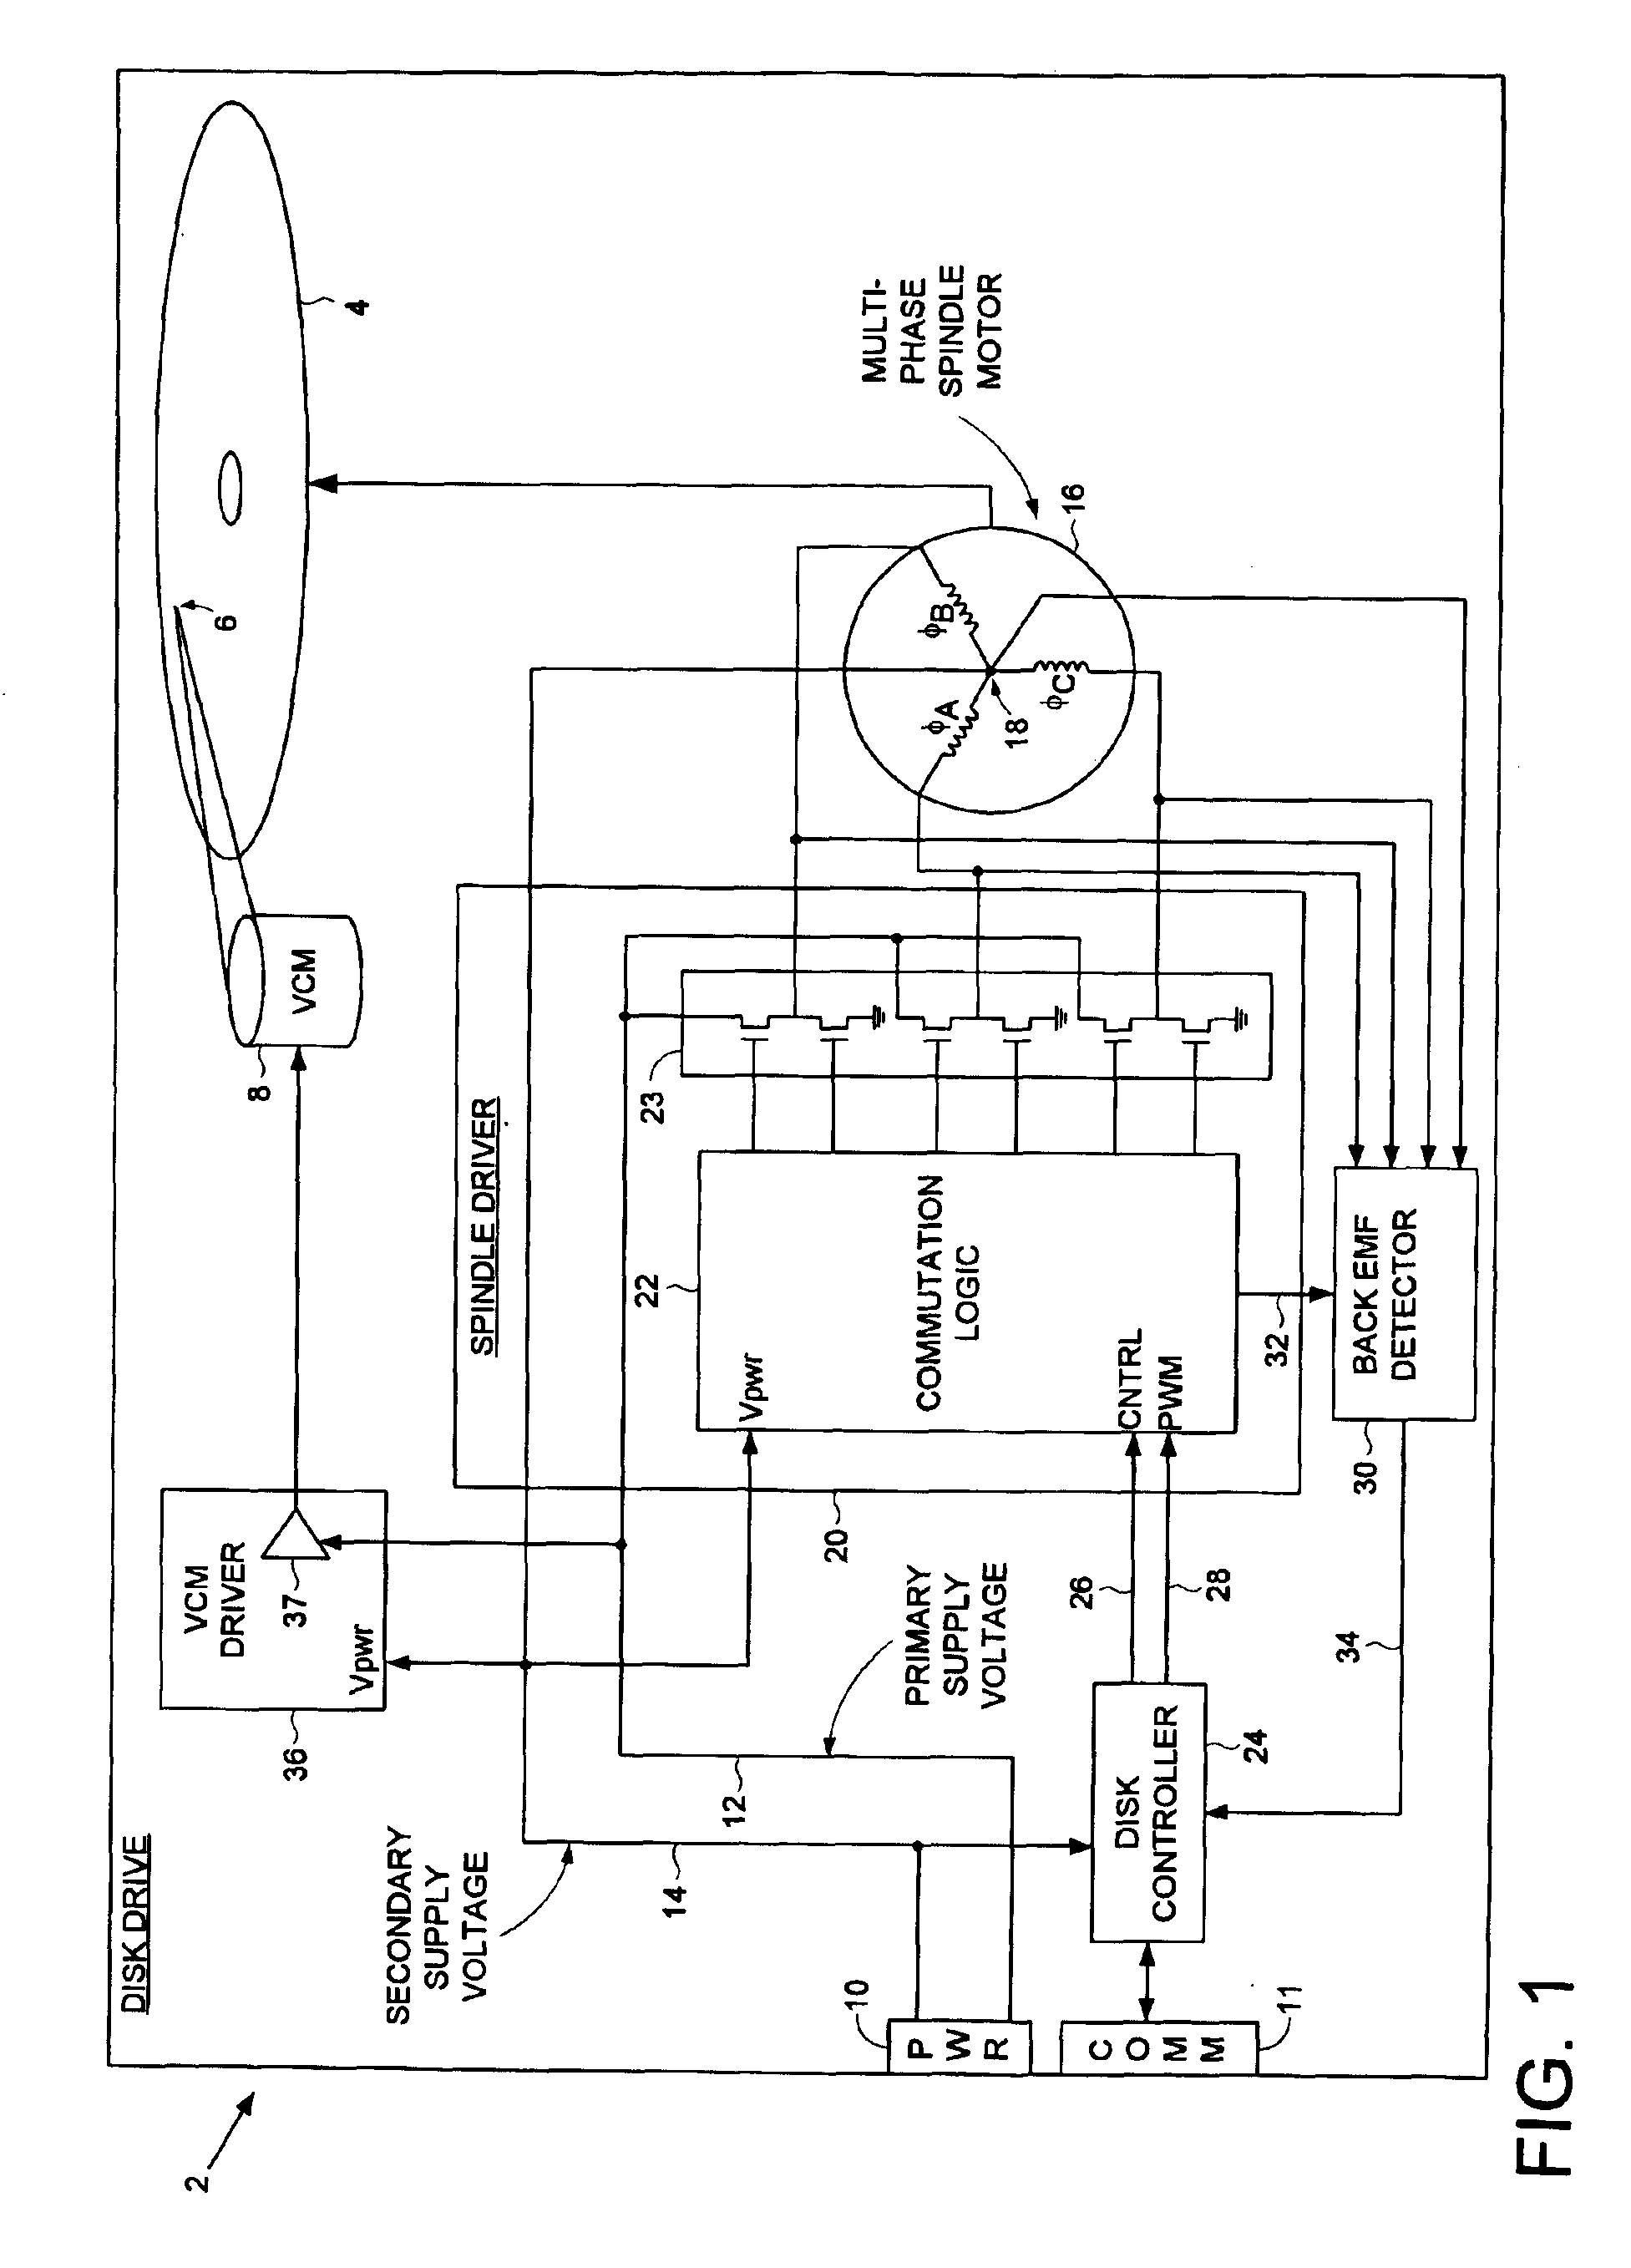 Disk drive comprising a multi-phase spindle motor having a center tap connectable to a secondary supply voltage